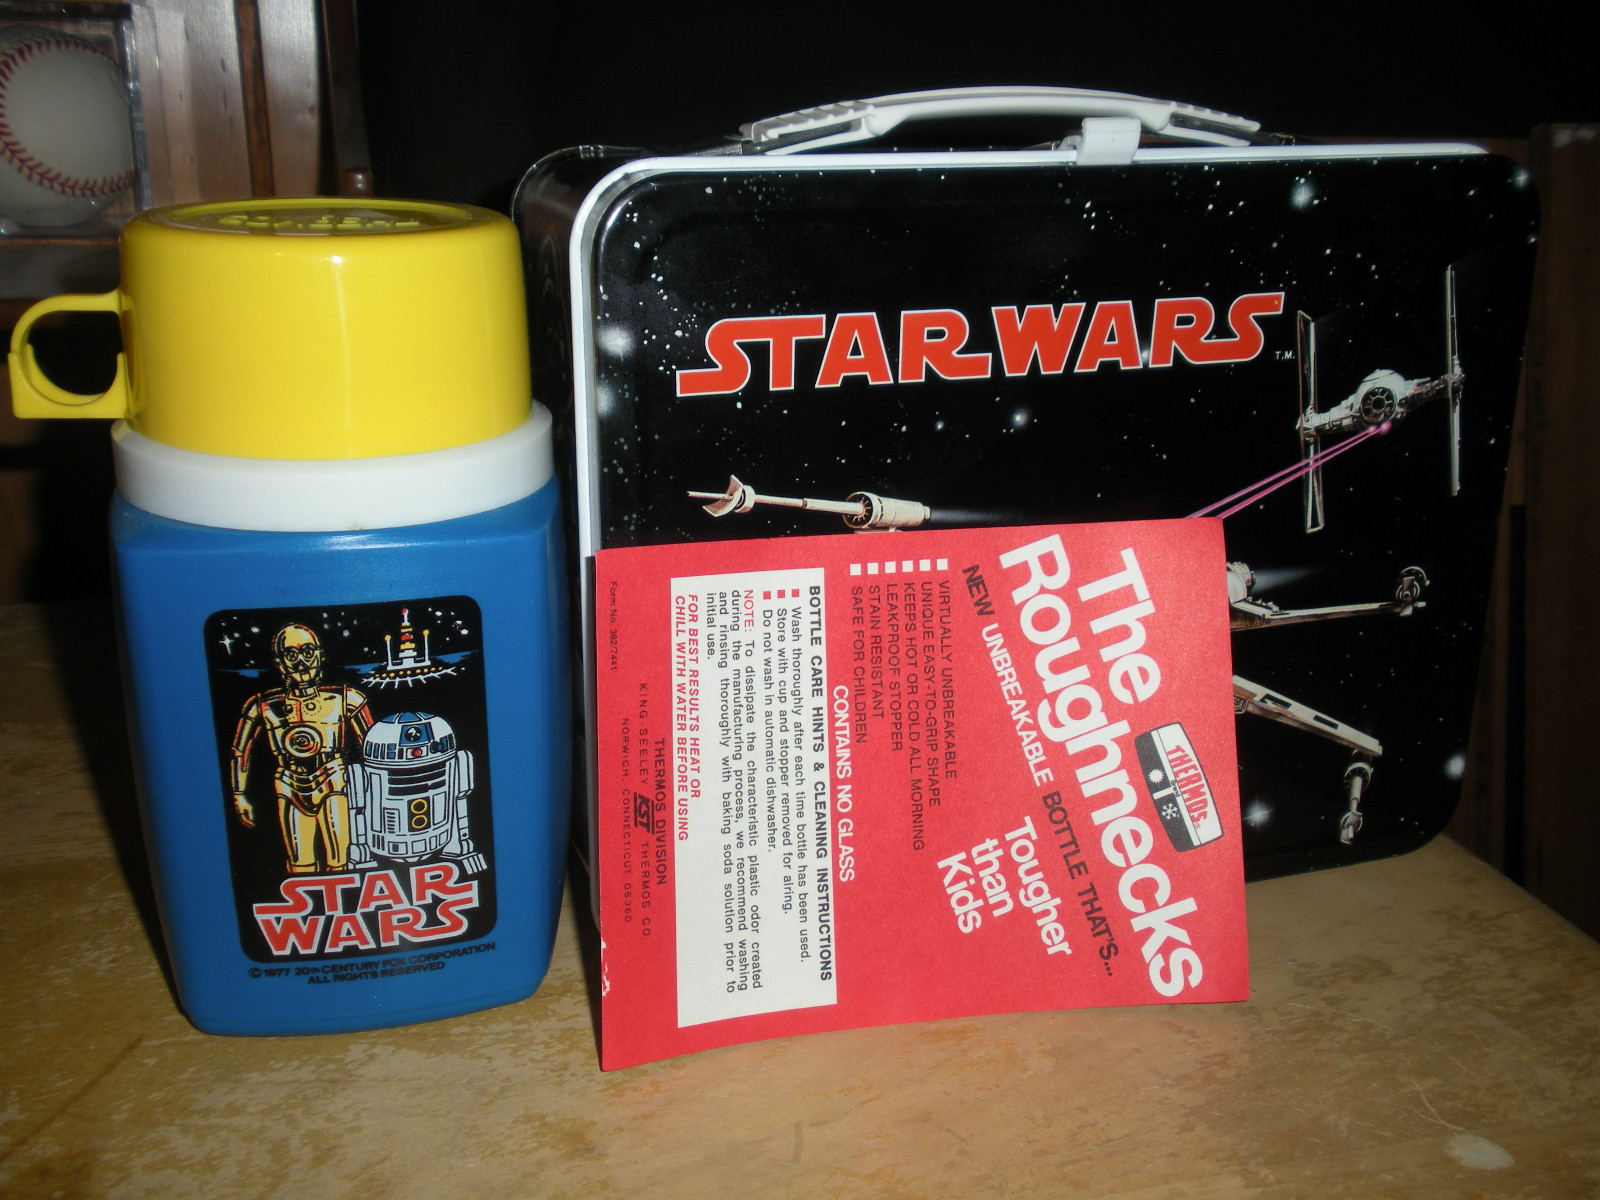 http://www.greatestcollectibles.com/wp-content/uploads/2012/05/1978-Star-Wars.jpg